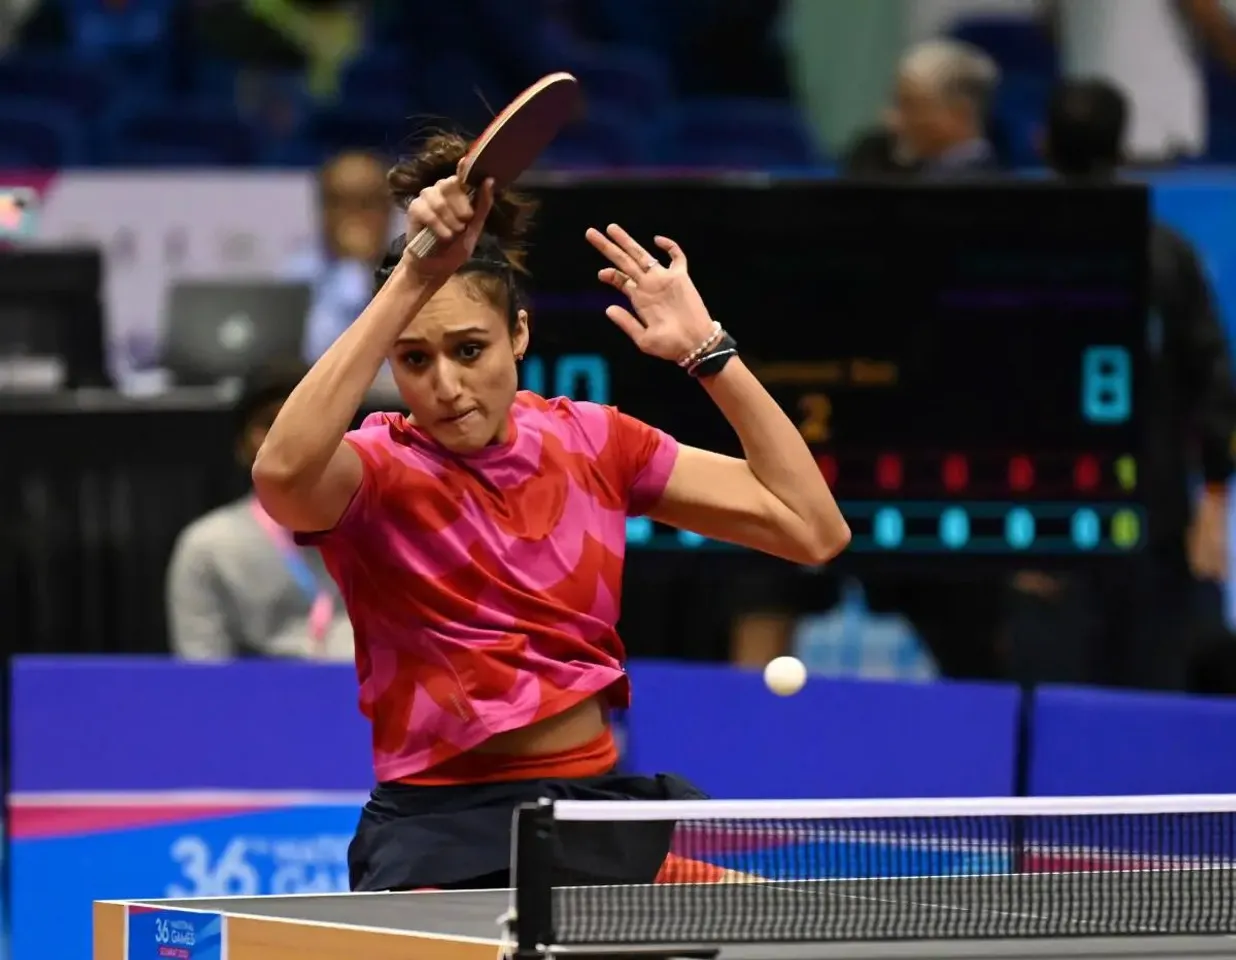 Singapore Smash 2023: India's campaign ends after Manika Batra loses in women's and mixed doubles